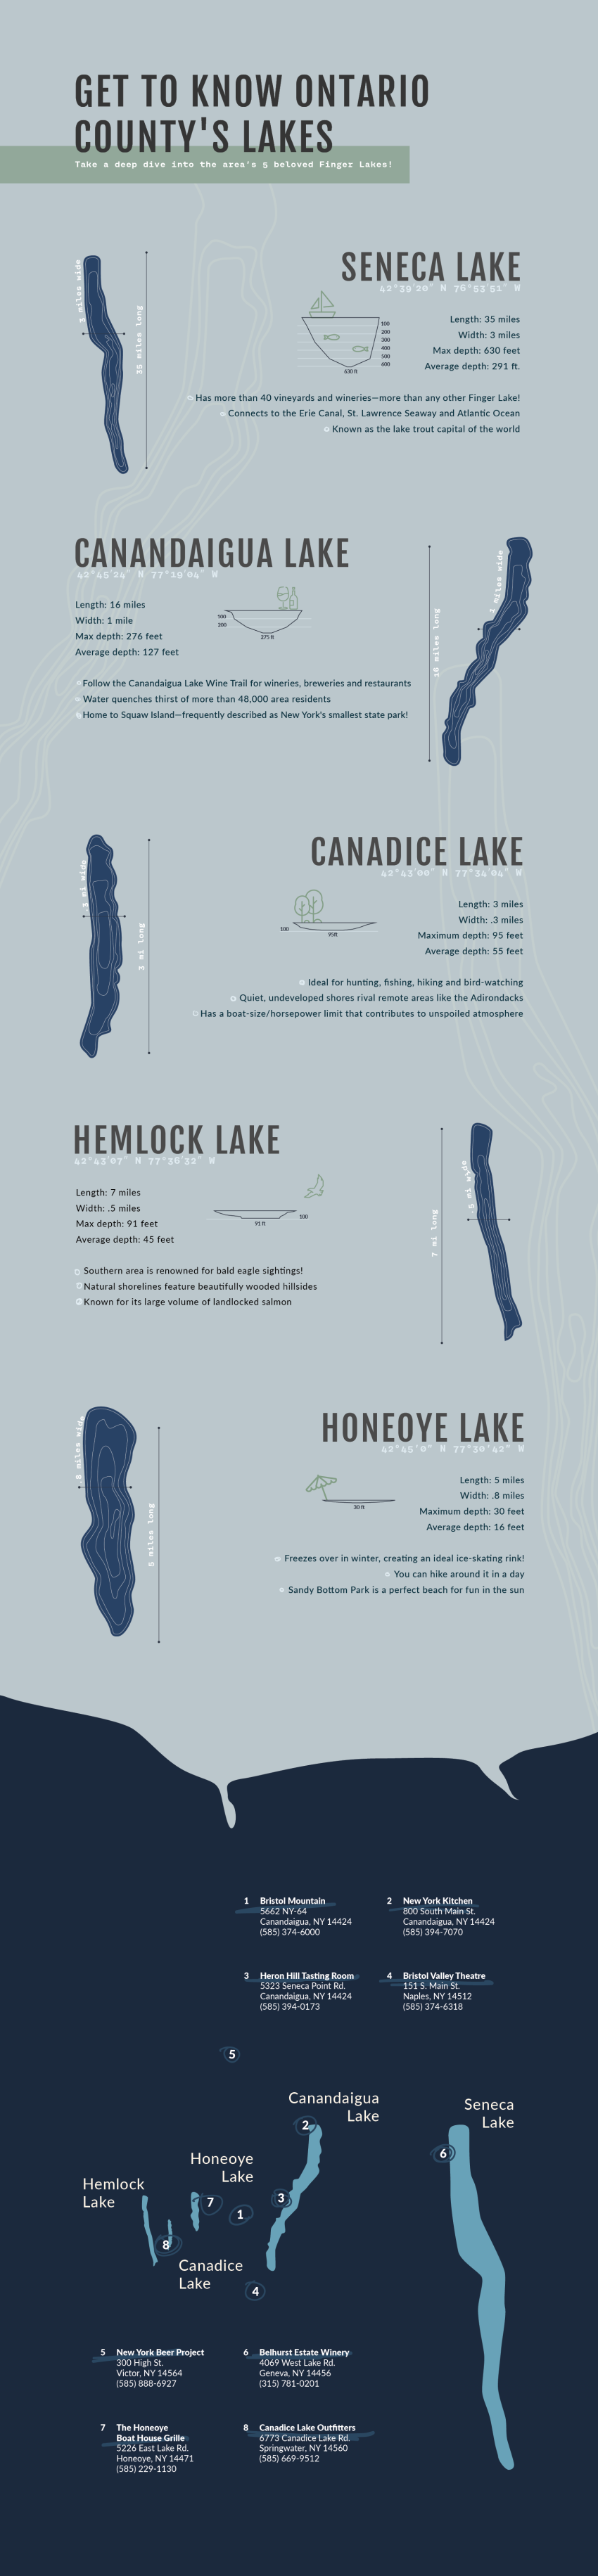 Get to Know Ontario County’s Lakes Infographic